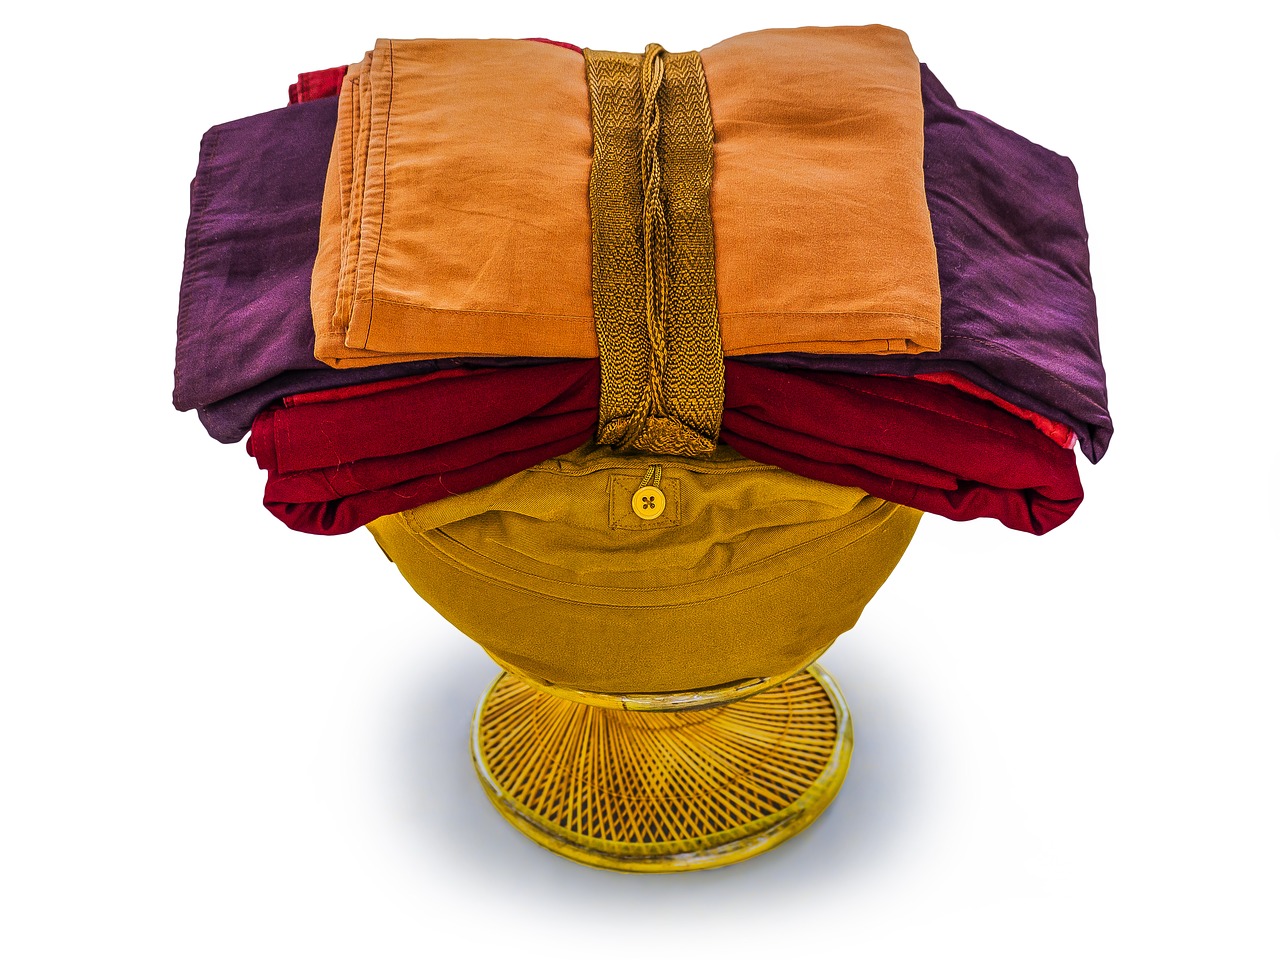 theravada buddhism bowl and robes bowl with robes free photo